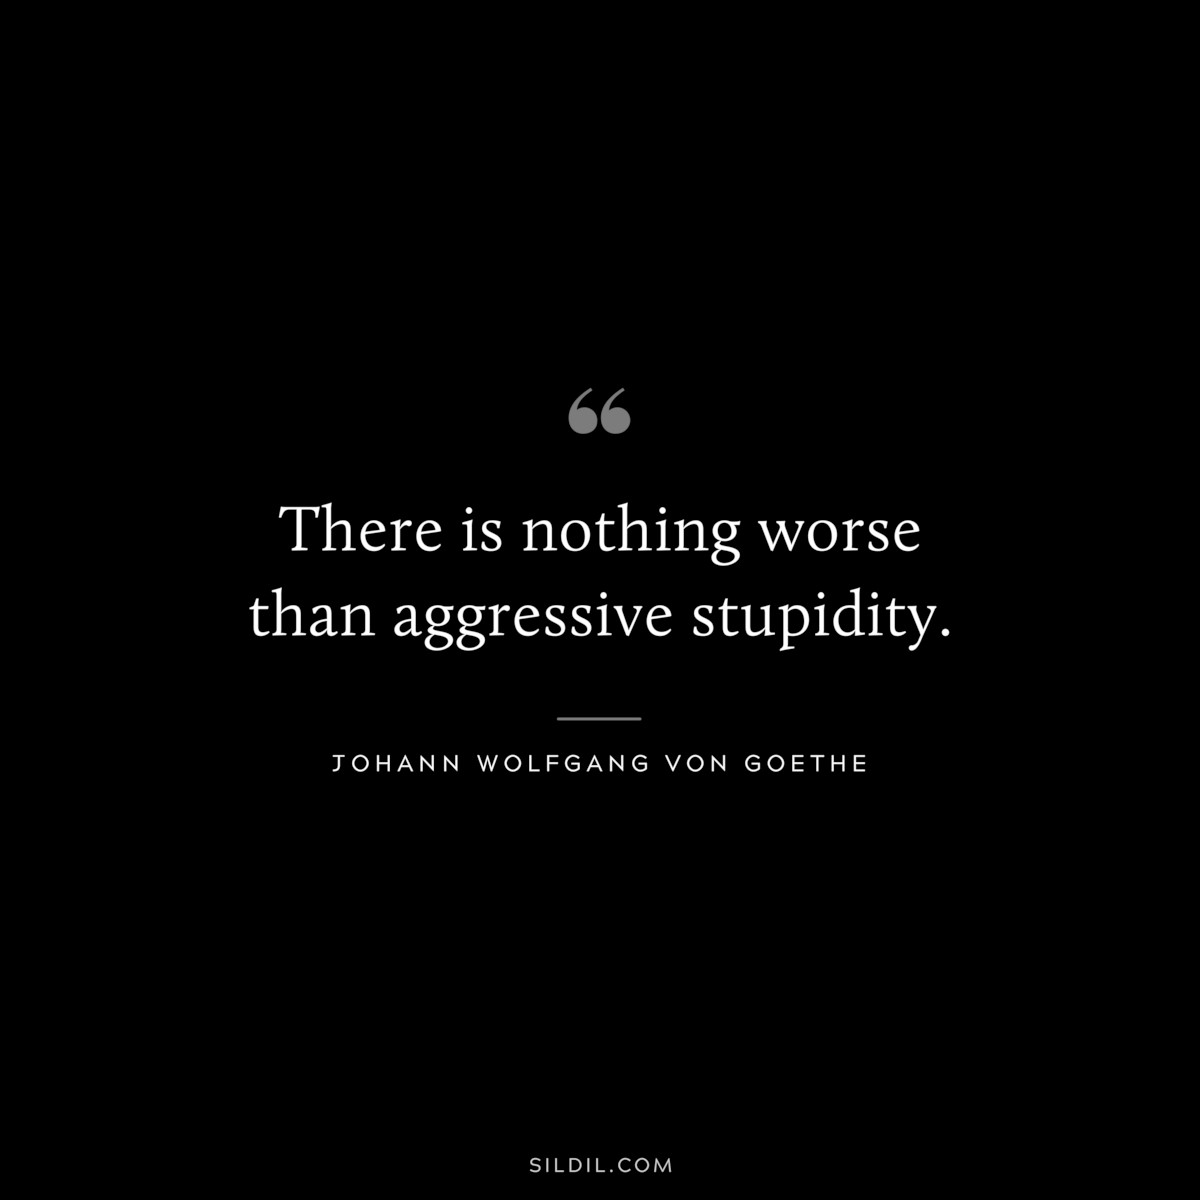 There is nothing worse than aggressive stupidity.― Johann Wolfgang von Goethe